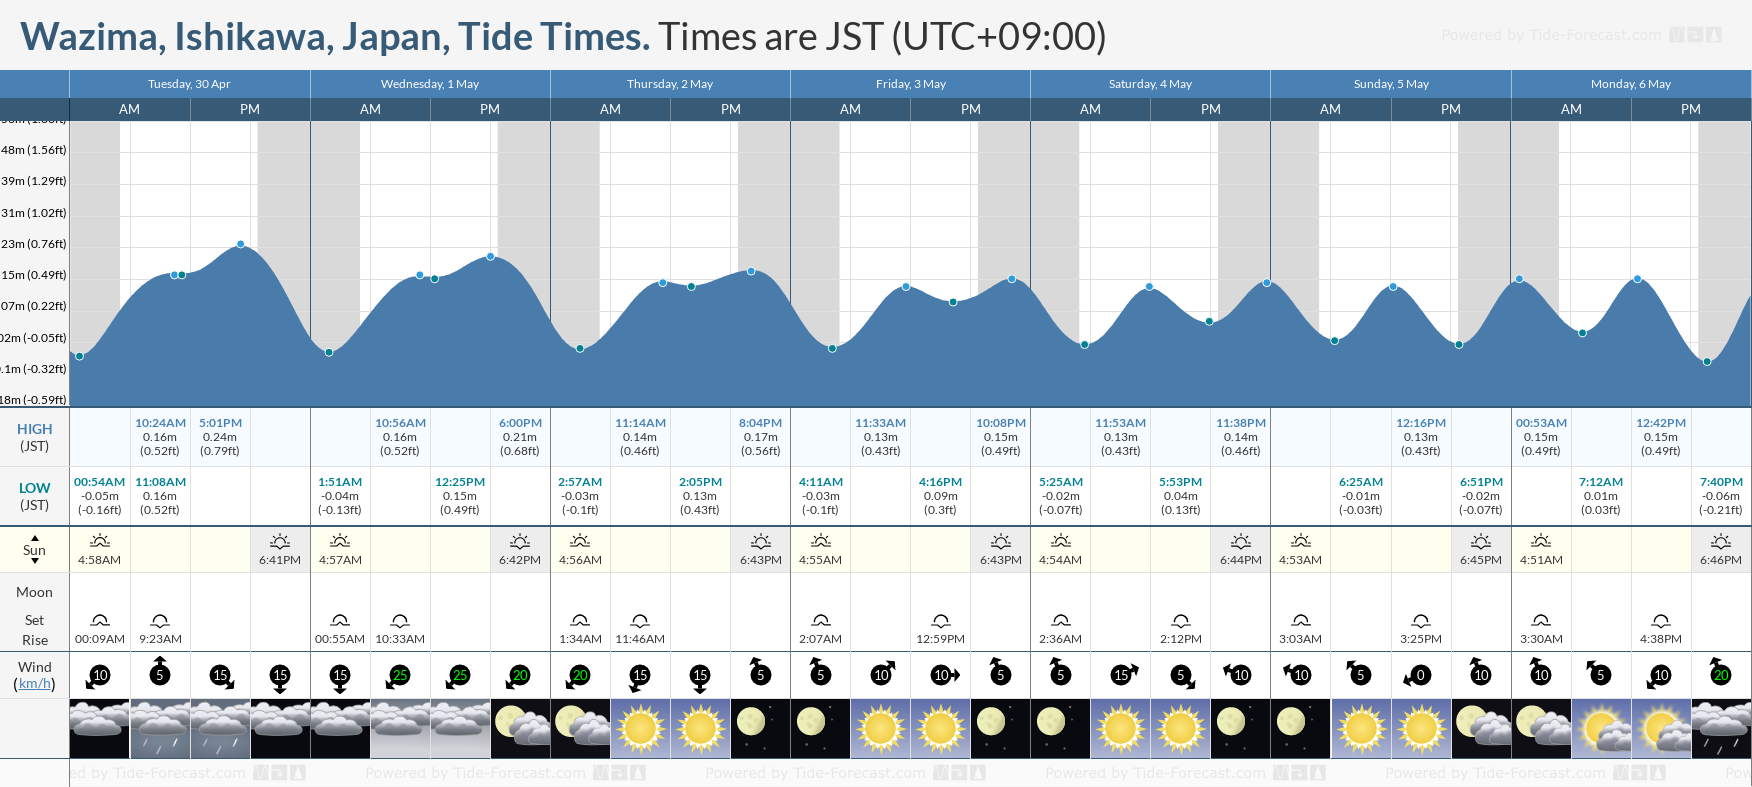 Wazima, Ishikawa, Japan Tide Chart including high and low tide tide times for the next 7 days